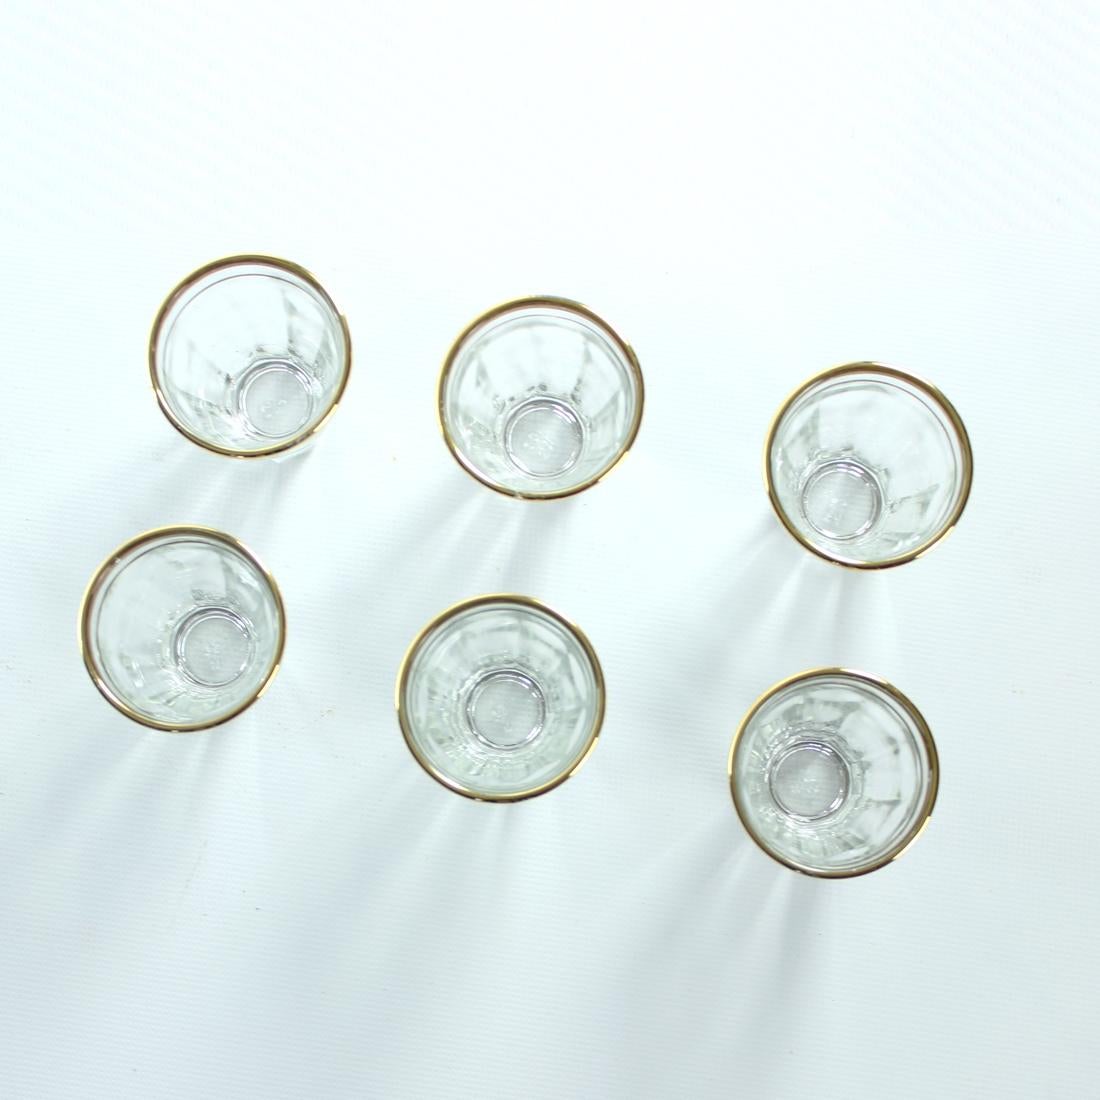 Vintage Drinking Glasses With Gold Rim, Set Of 6, Czechoslovakia 1960s For Sale 1